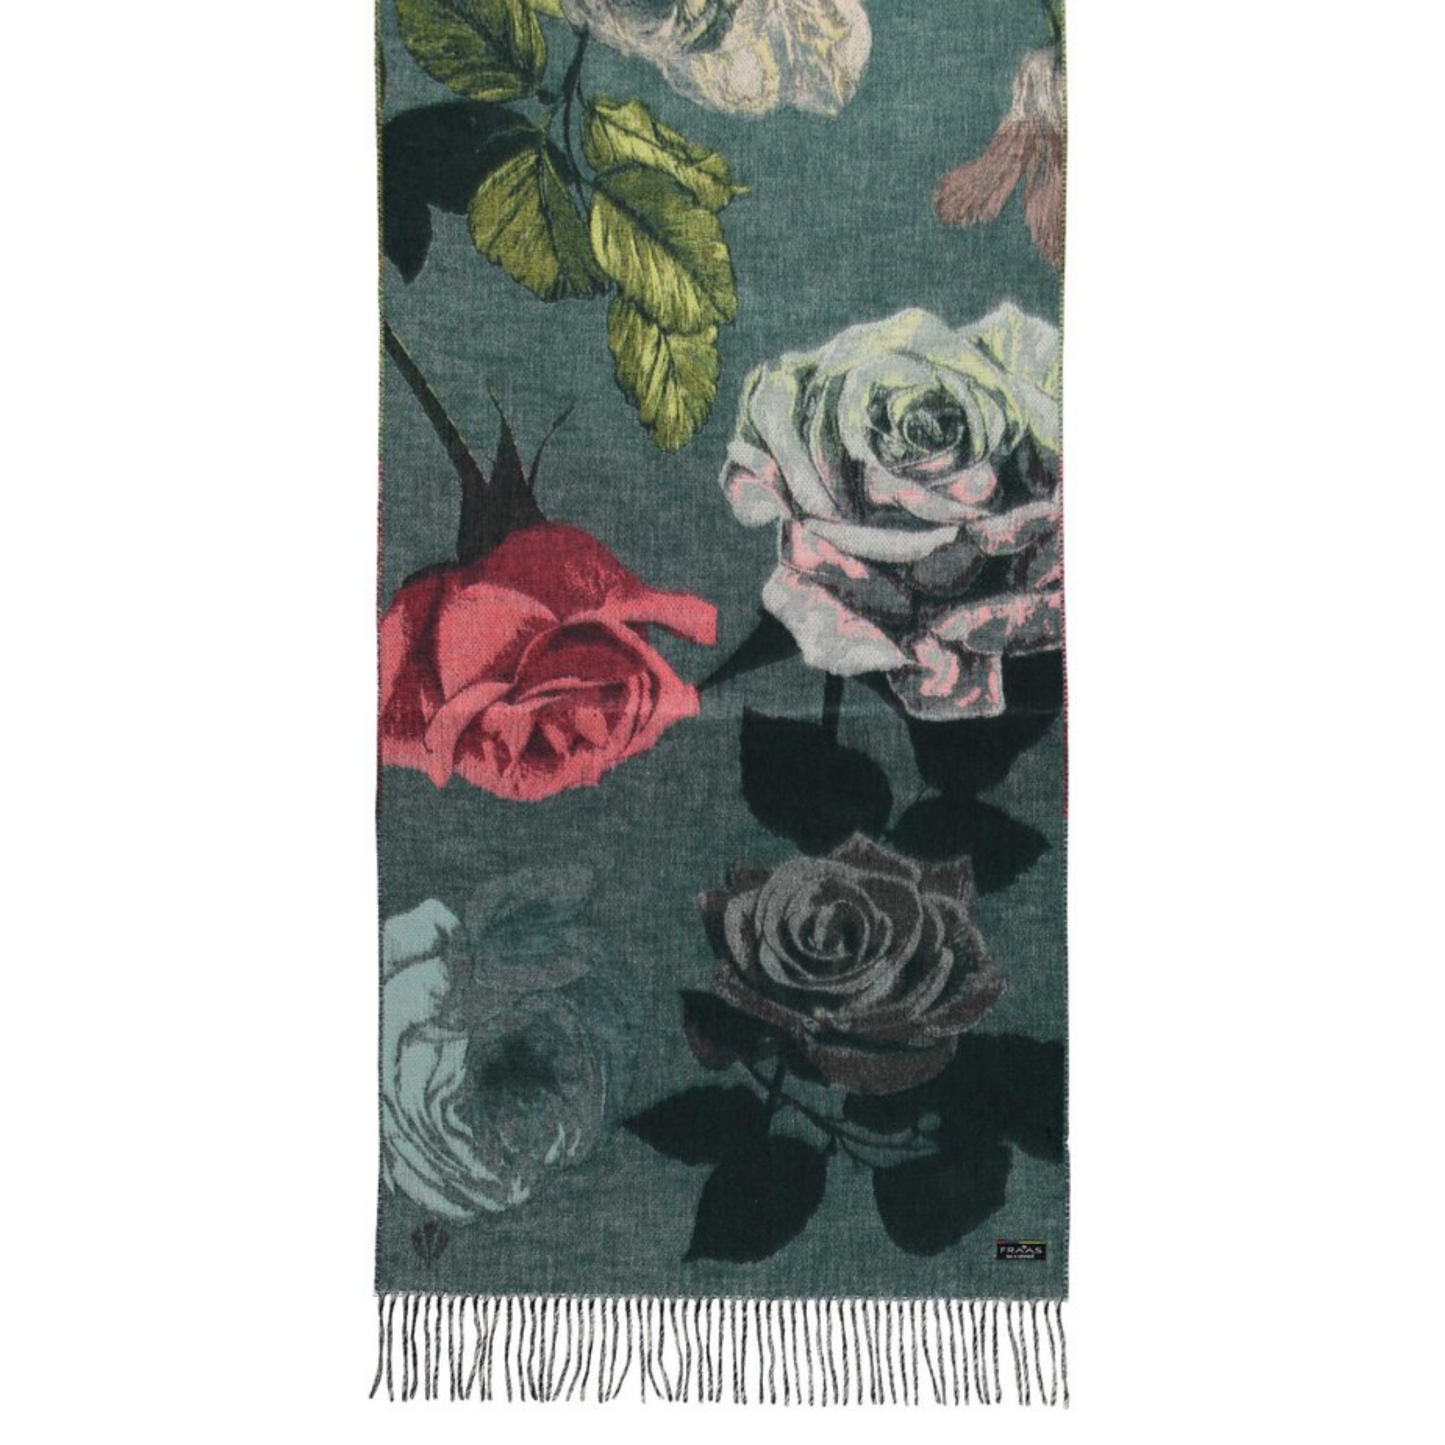 A view of the print of the scarf shoes various colours of white, green, and pink roses on a blue-green background with tassels on the ends.